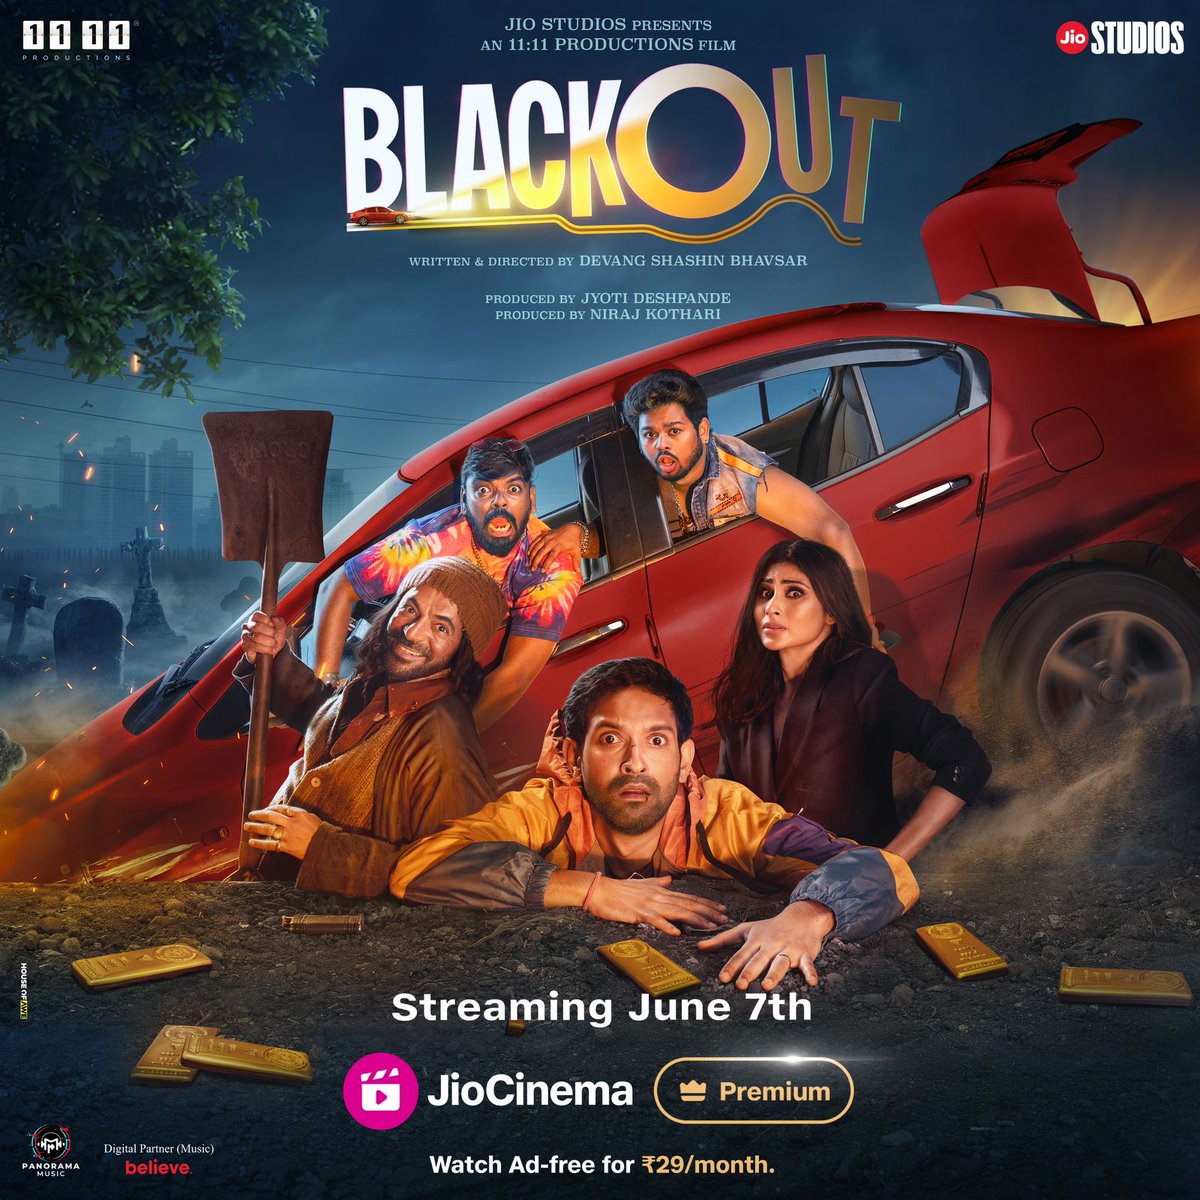 *First look of Vikrant Massey’s Blackout is here!* Vikrant Massey is all set to captive audiences once again with #Blackout. Presenting the first poster of the upcoming hilarious comedy of errors #Blackout boasts a stellar ensemble cast featuring @VikrantMassey, @whoSunilGrover,